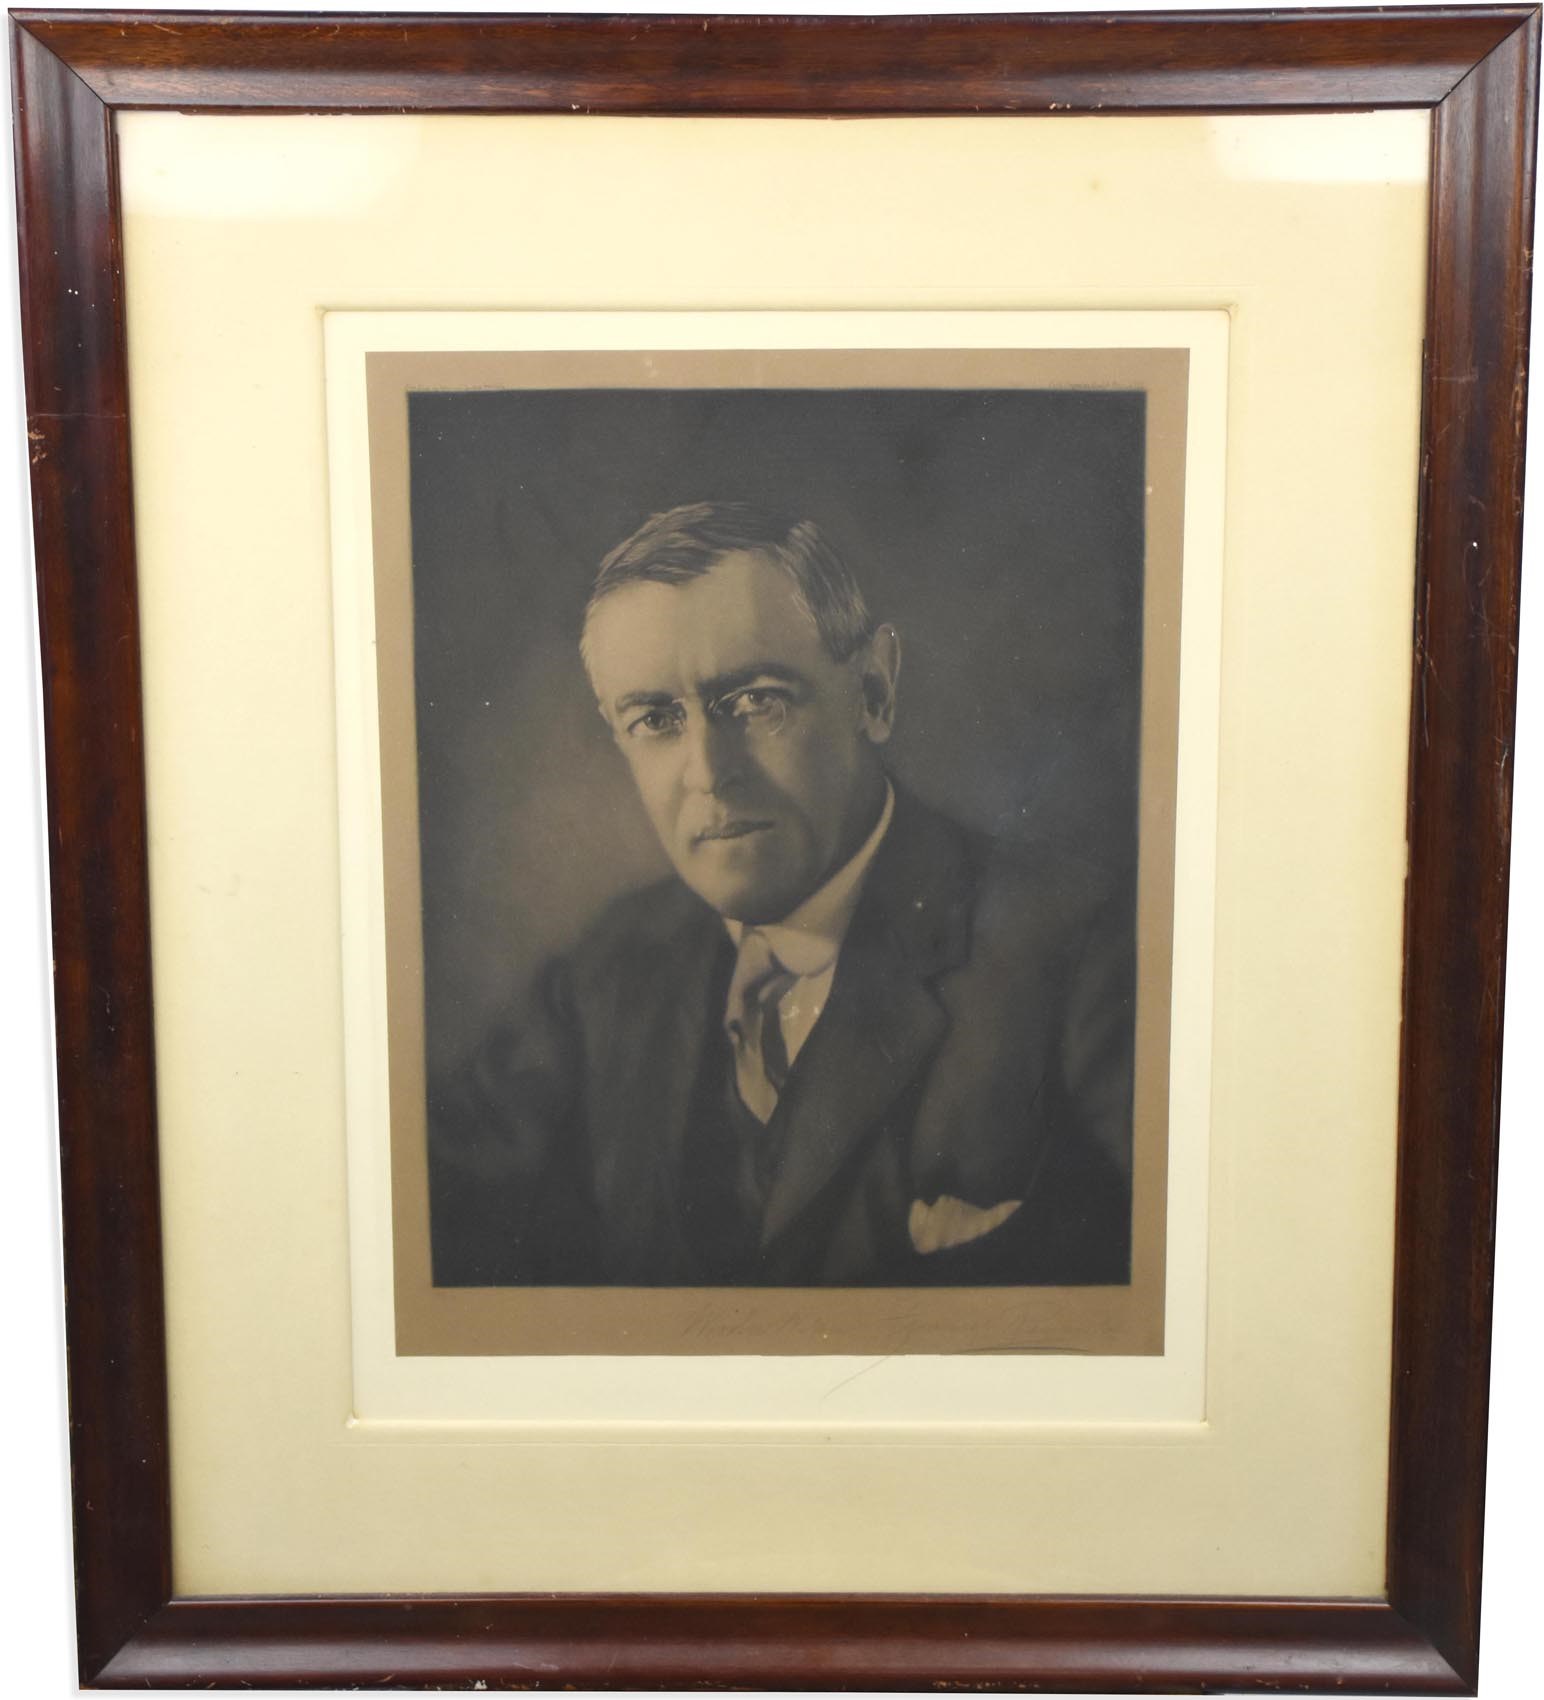 - 1916 Woodrow Wilson Signed Limited Edition Portrait Engraving